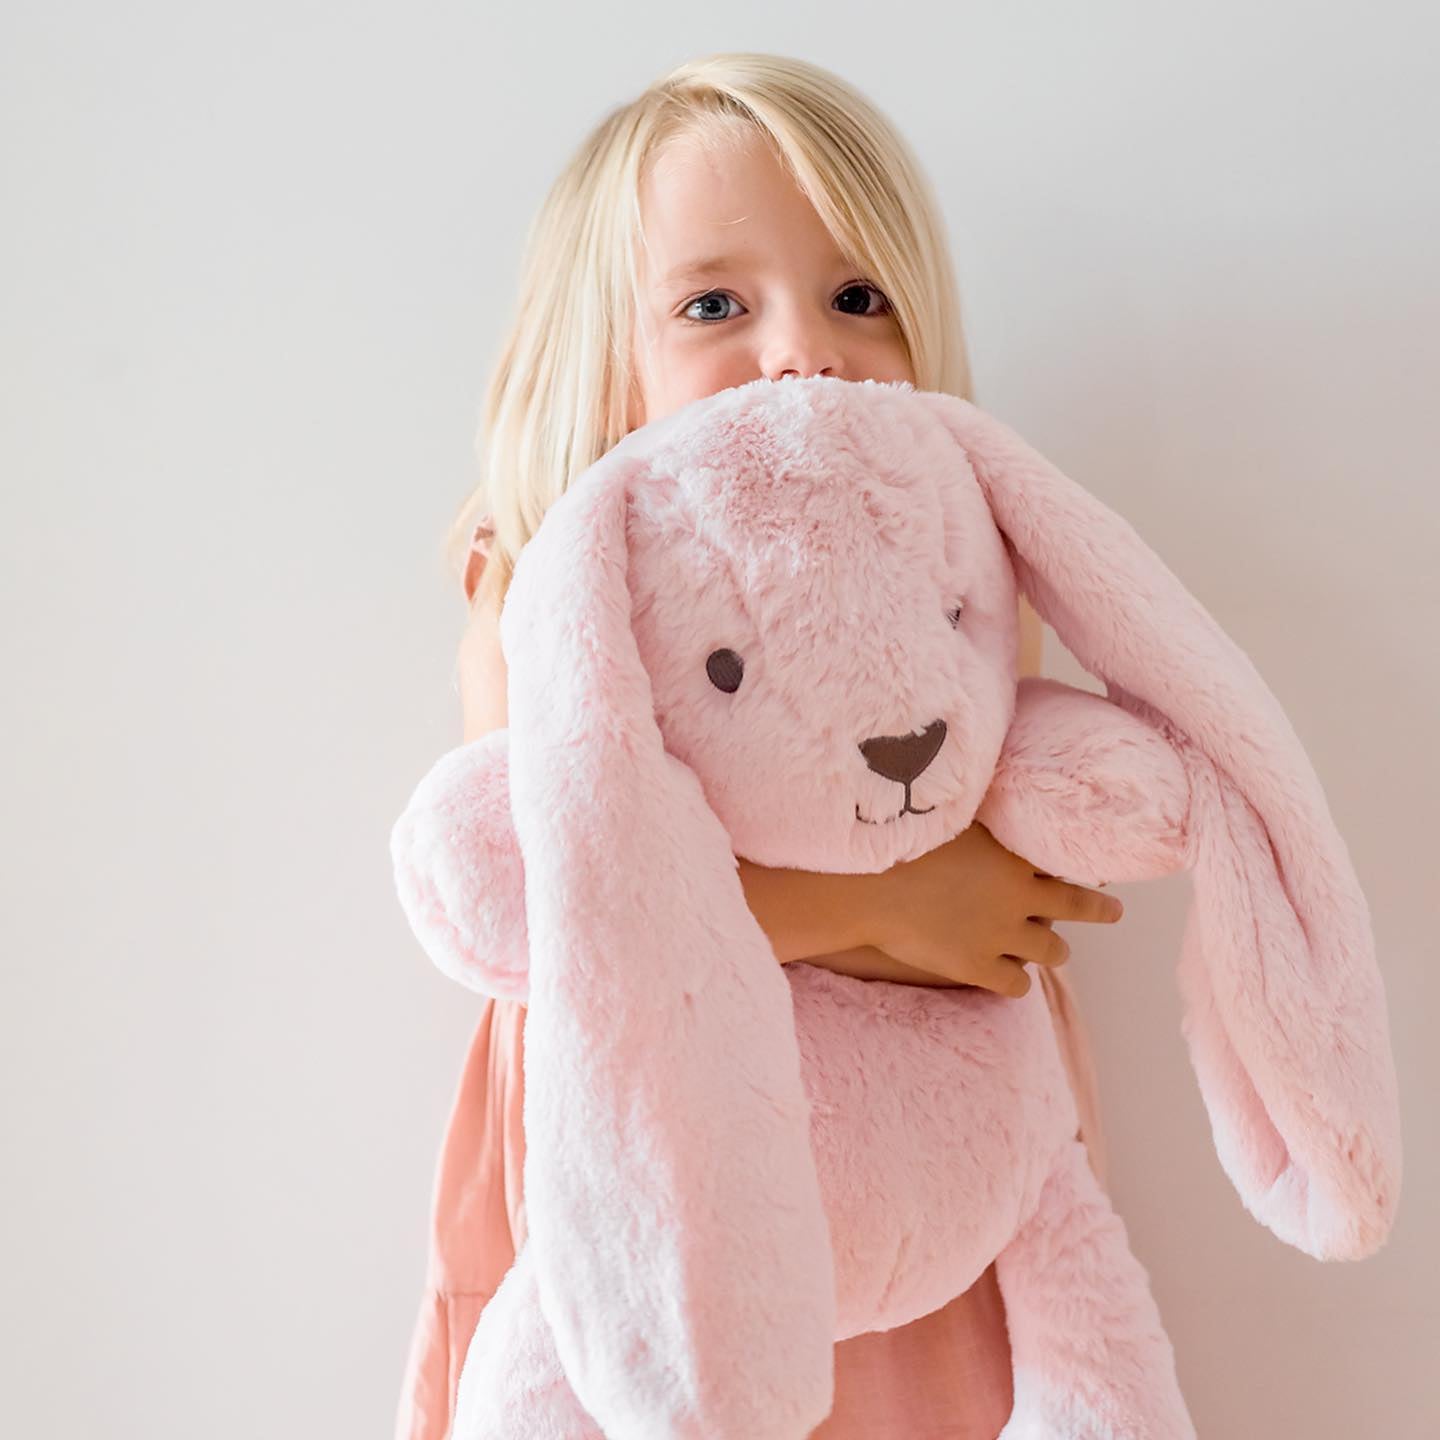 Fun Easter Ideas for Kids